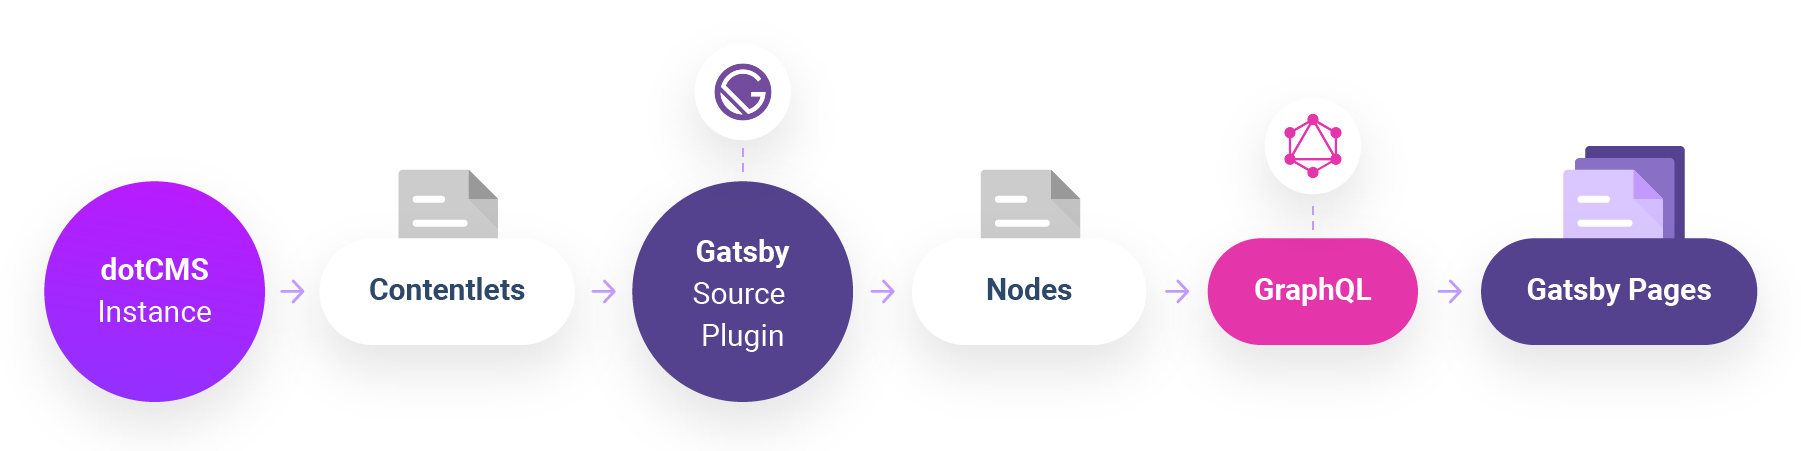 dotCMS to Gatsby Page Diagram